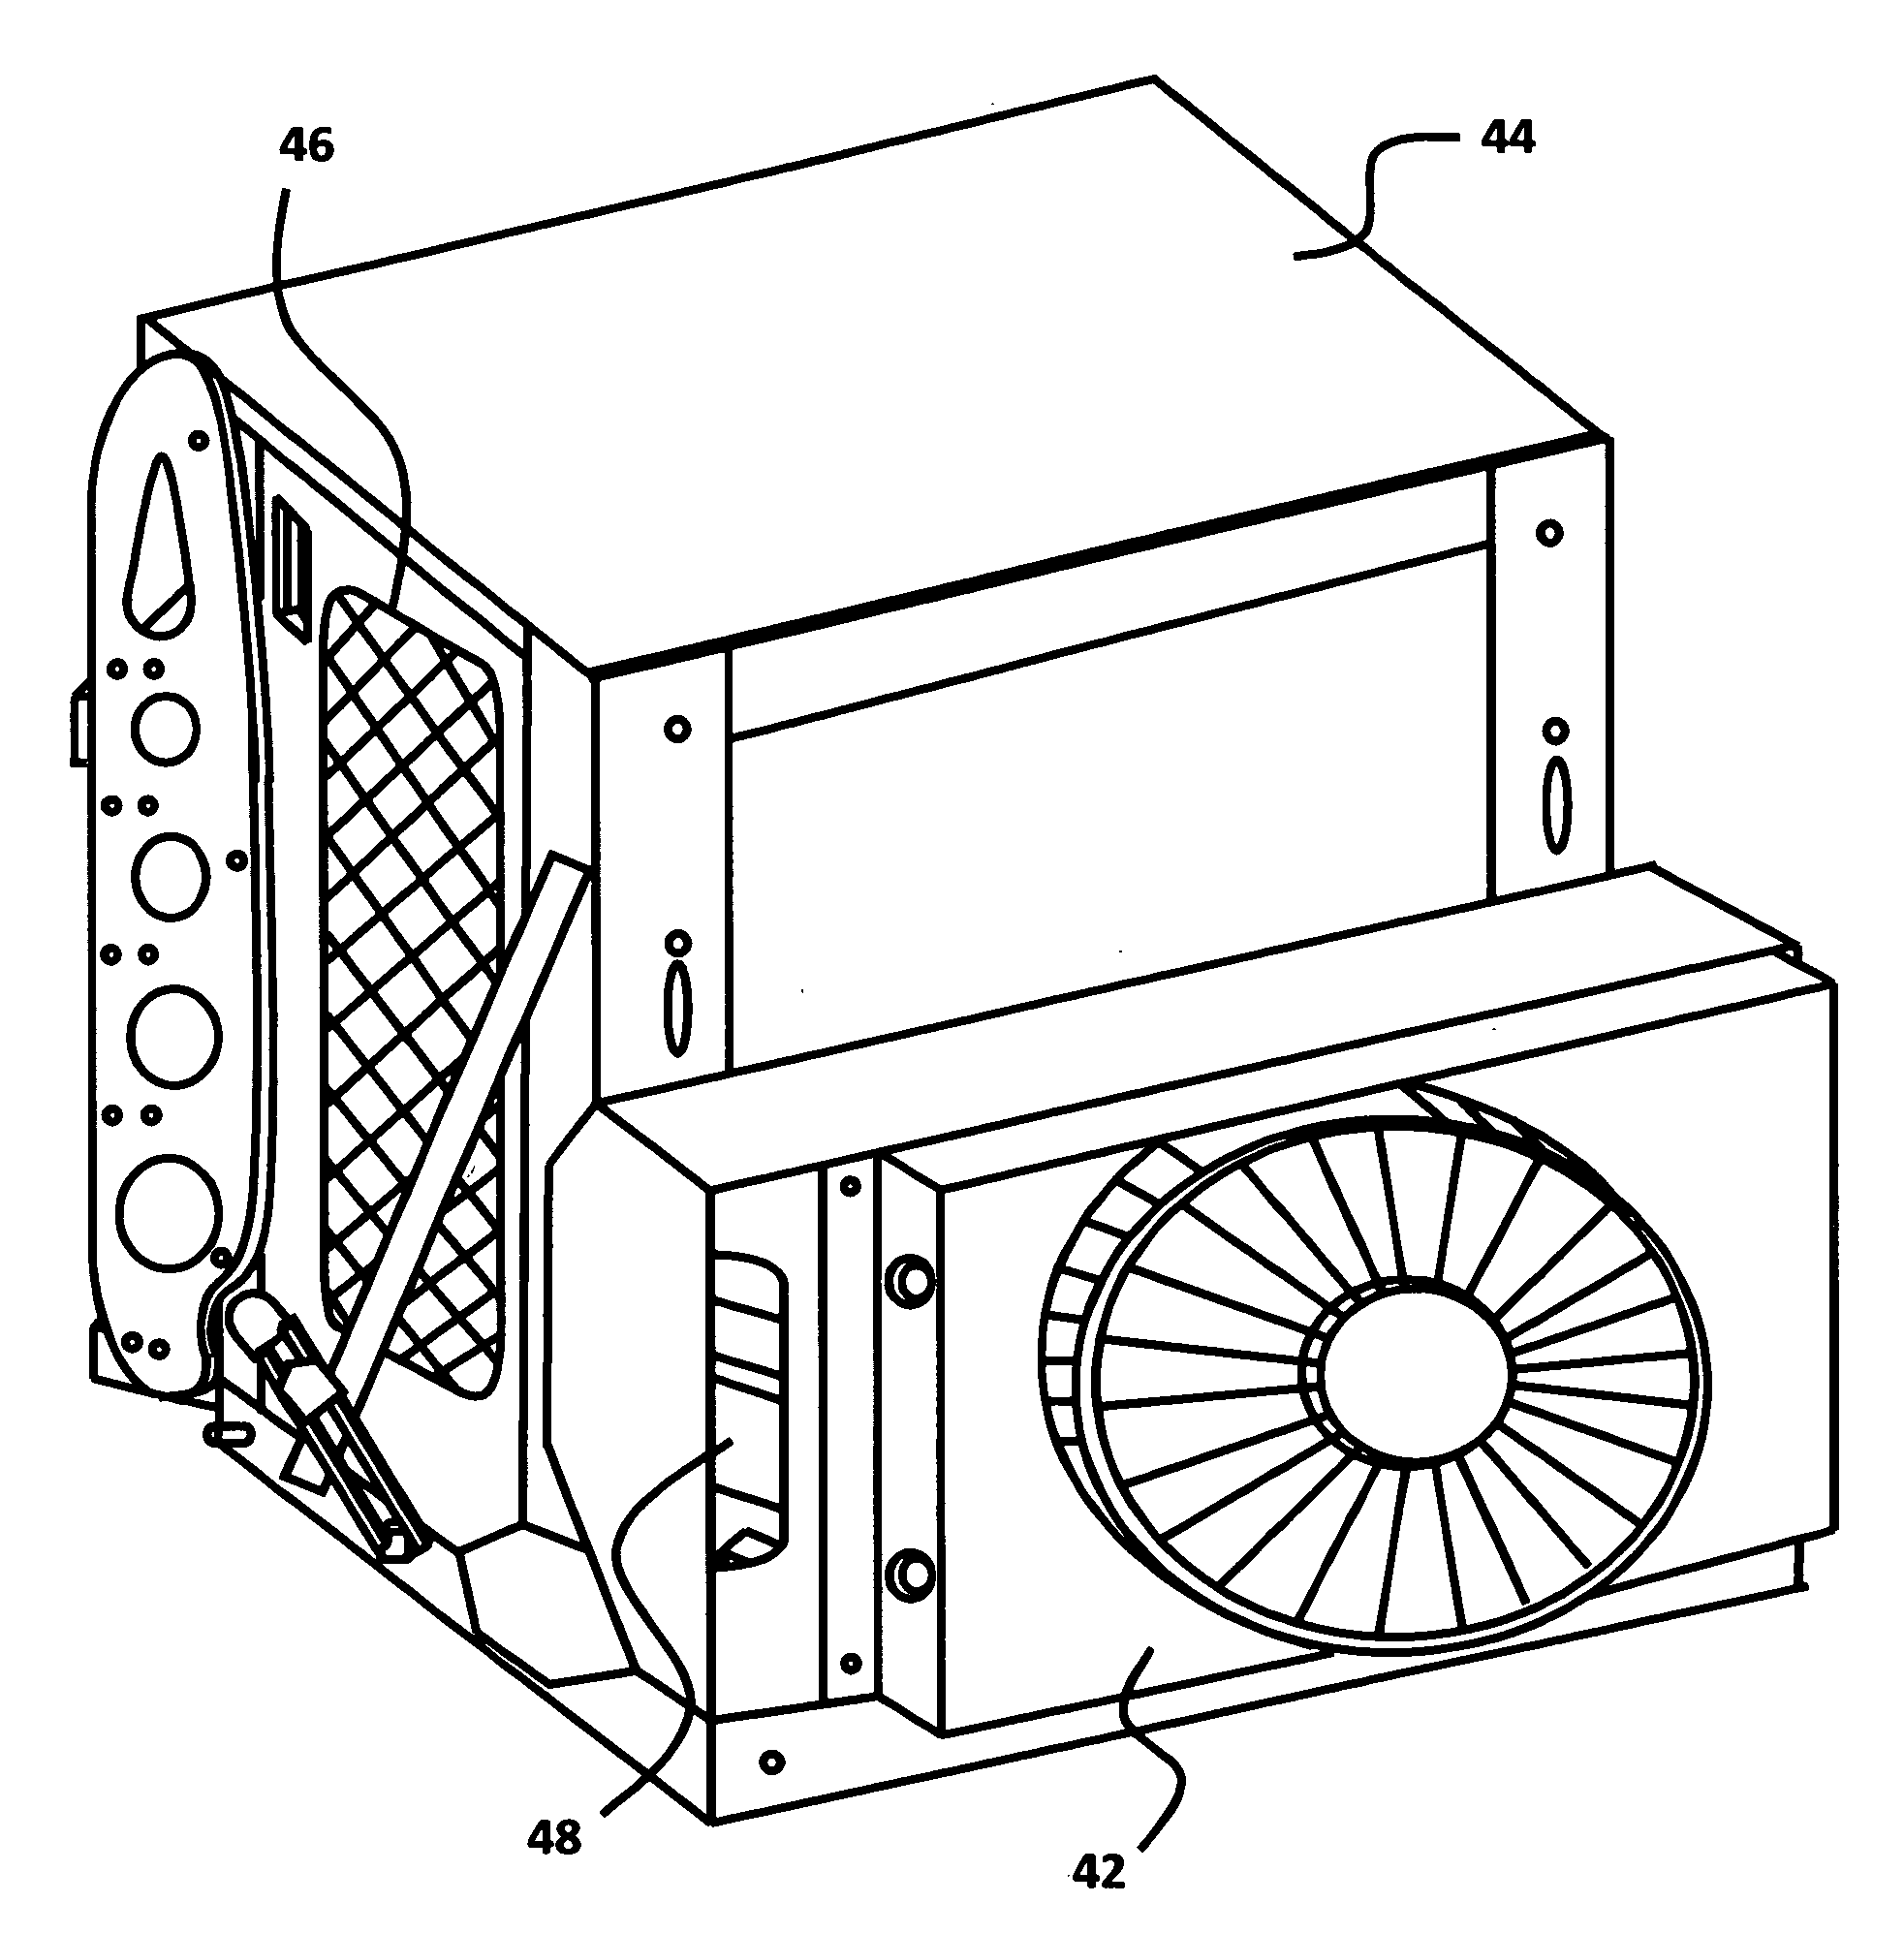 Diesel particulate filter system for auxiliary power units